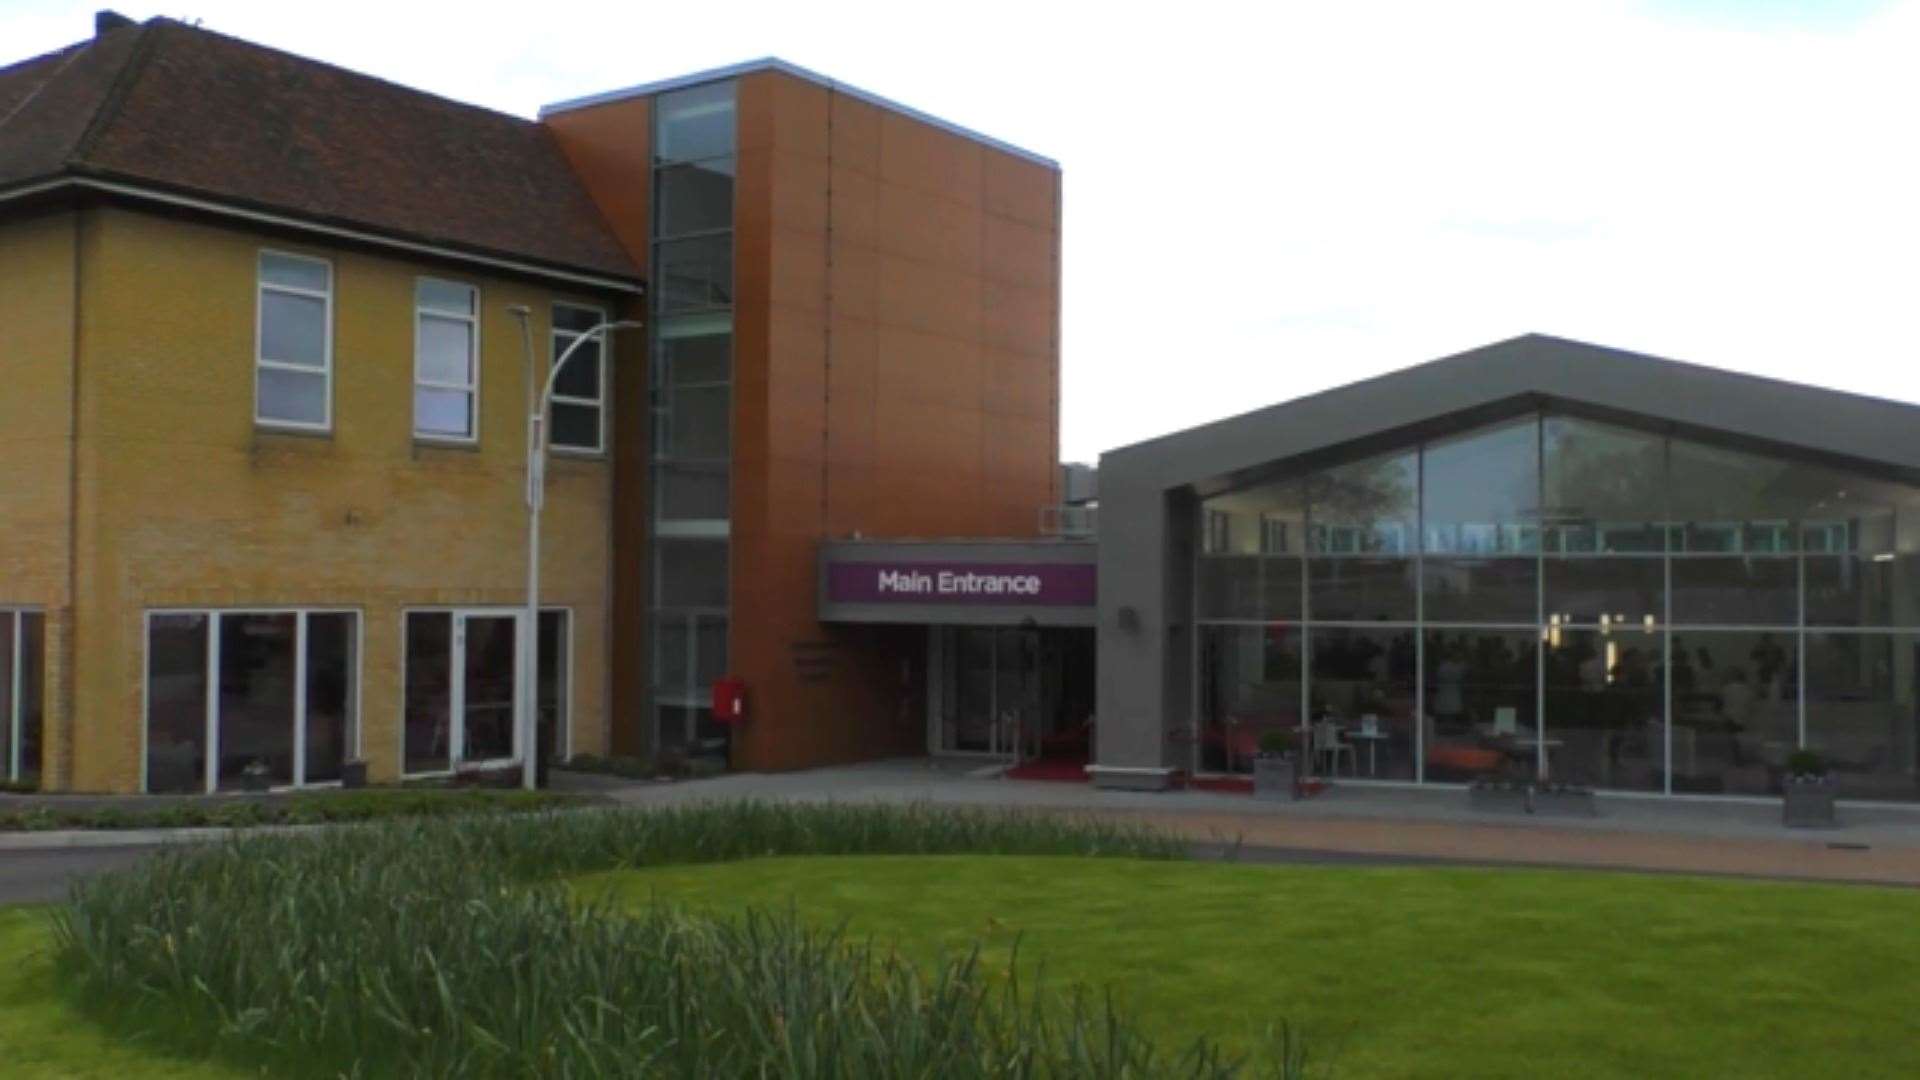 Benenden Hospital has also offered up beds to NHS patients during the ongoing crisis